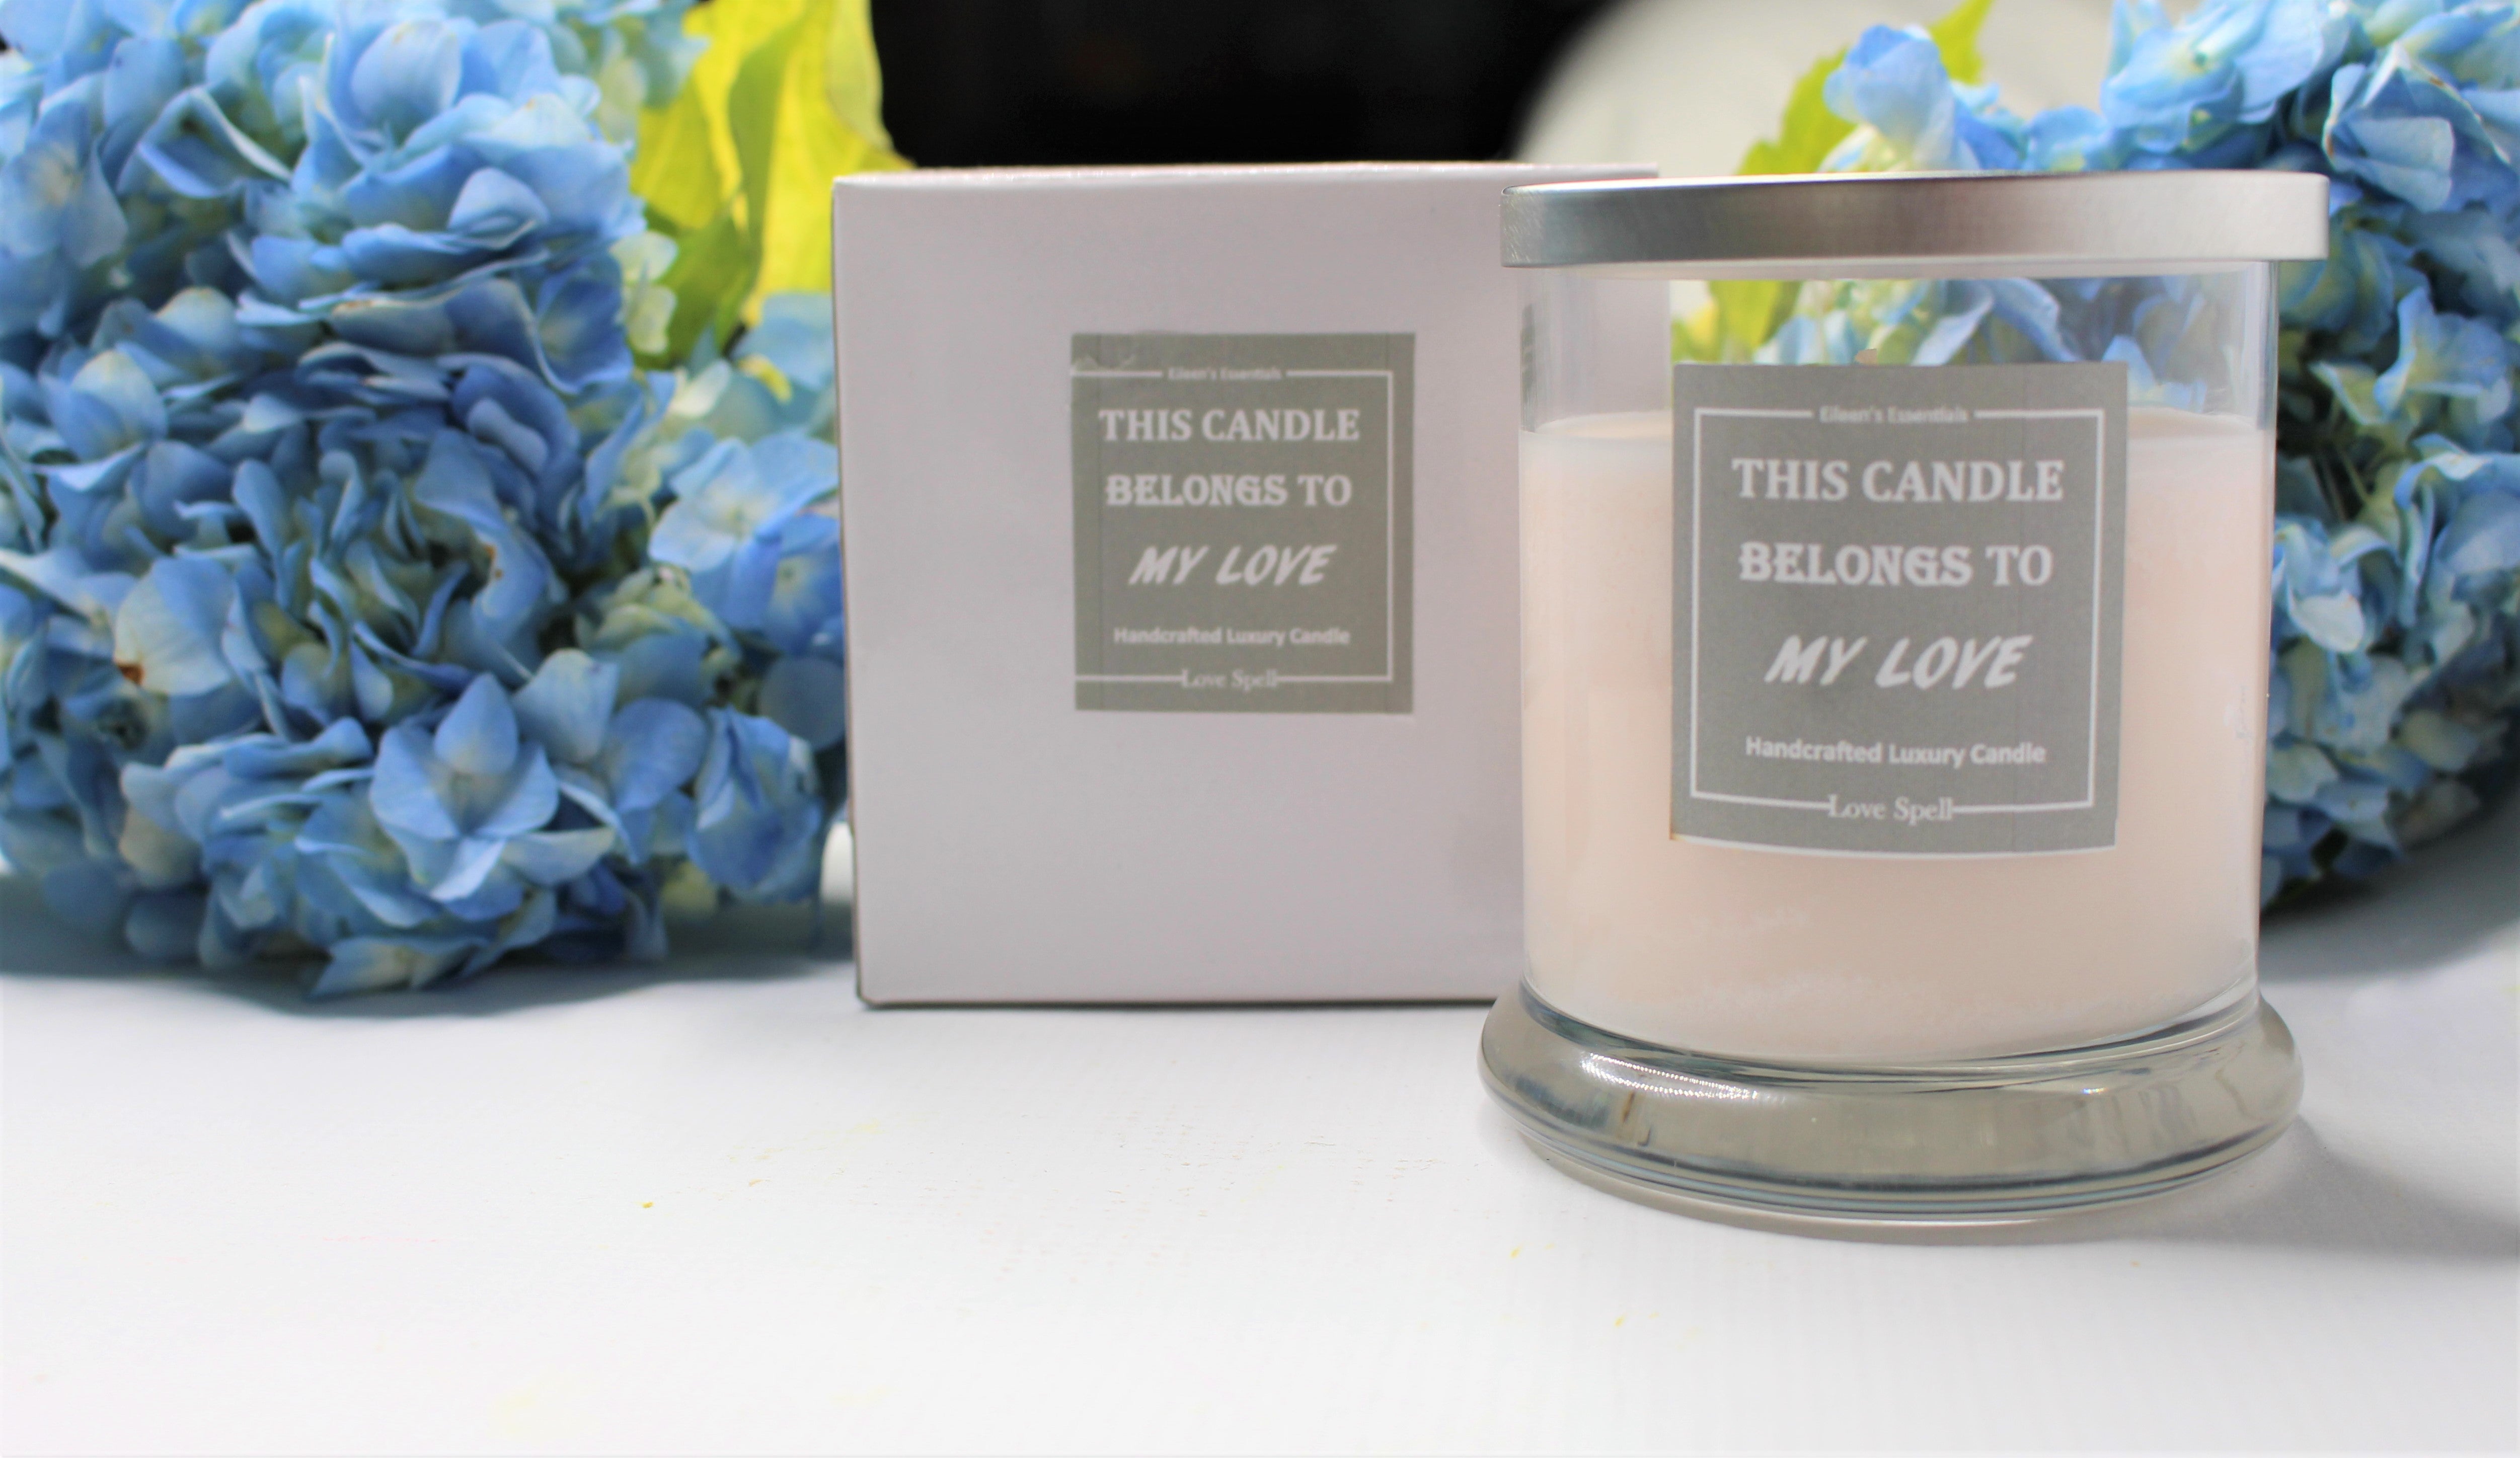 Signature Scent; THIS CANDLE BELONGS TO MY LOVE - Eileen's Essentials